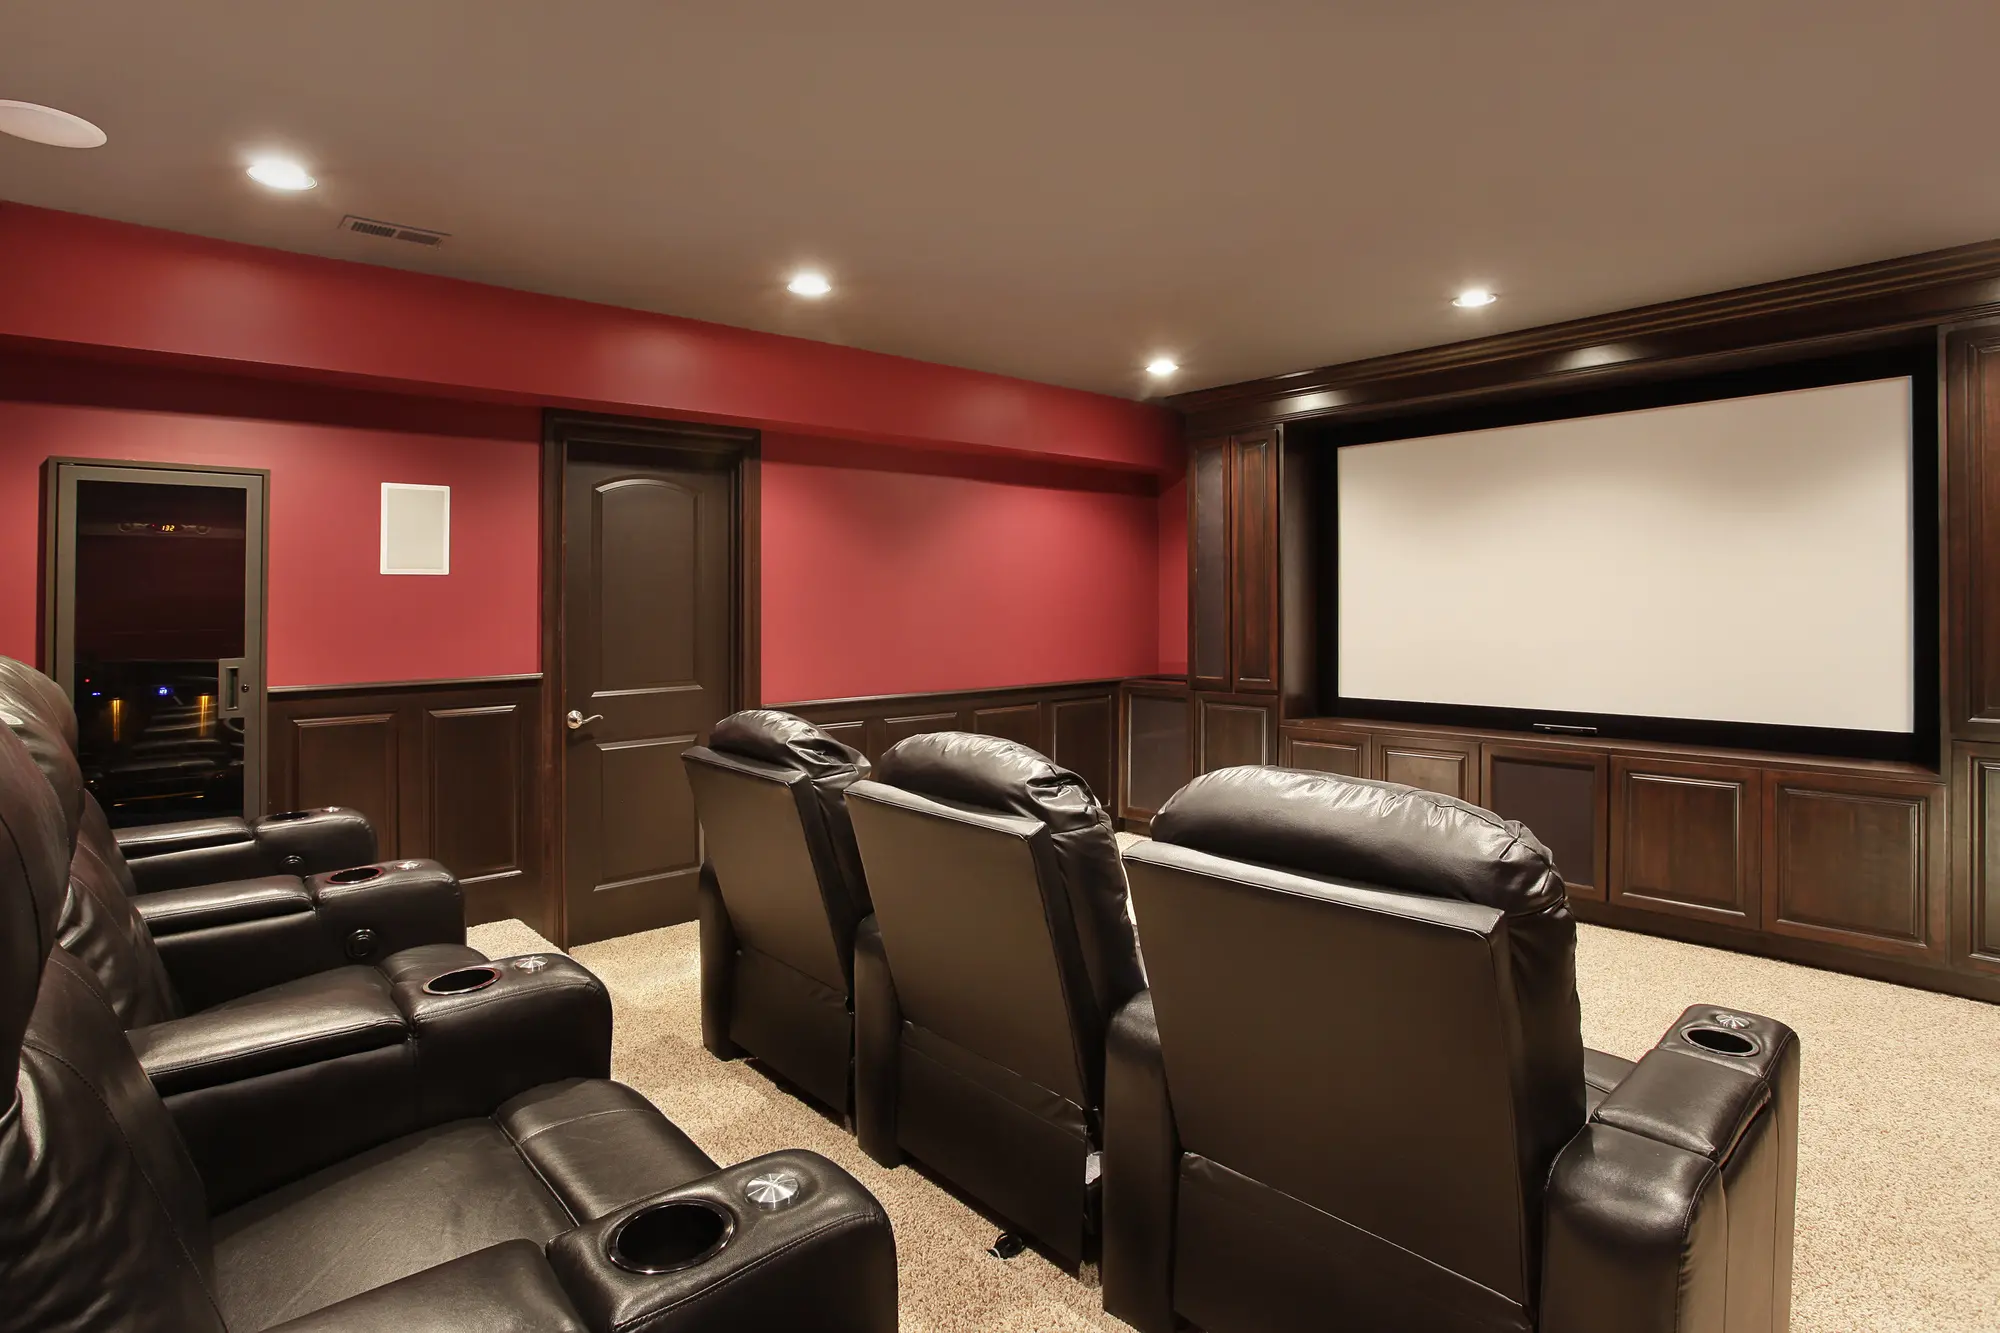 Theater in luxury home